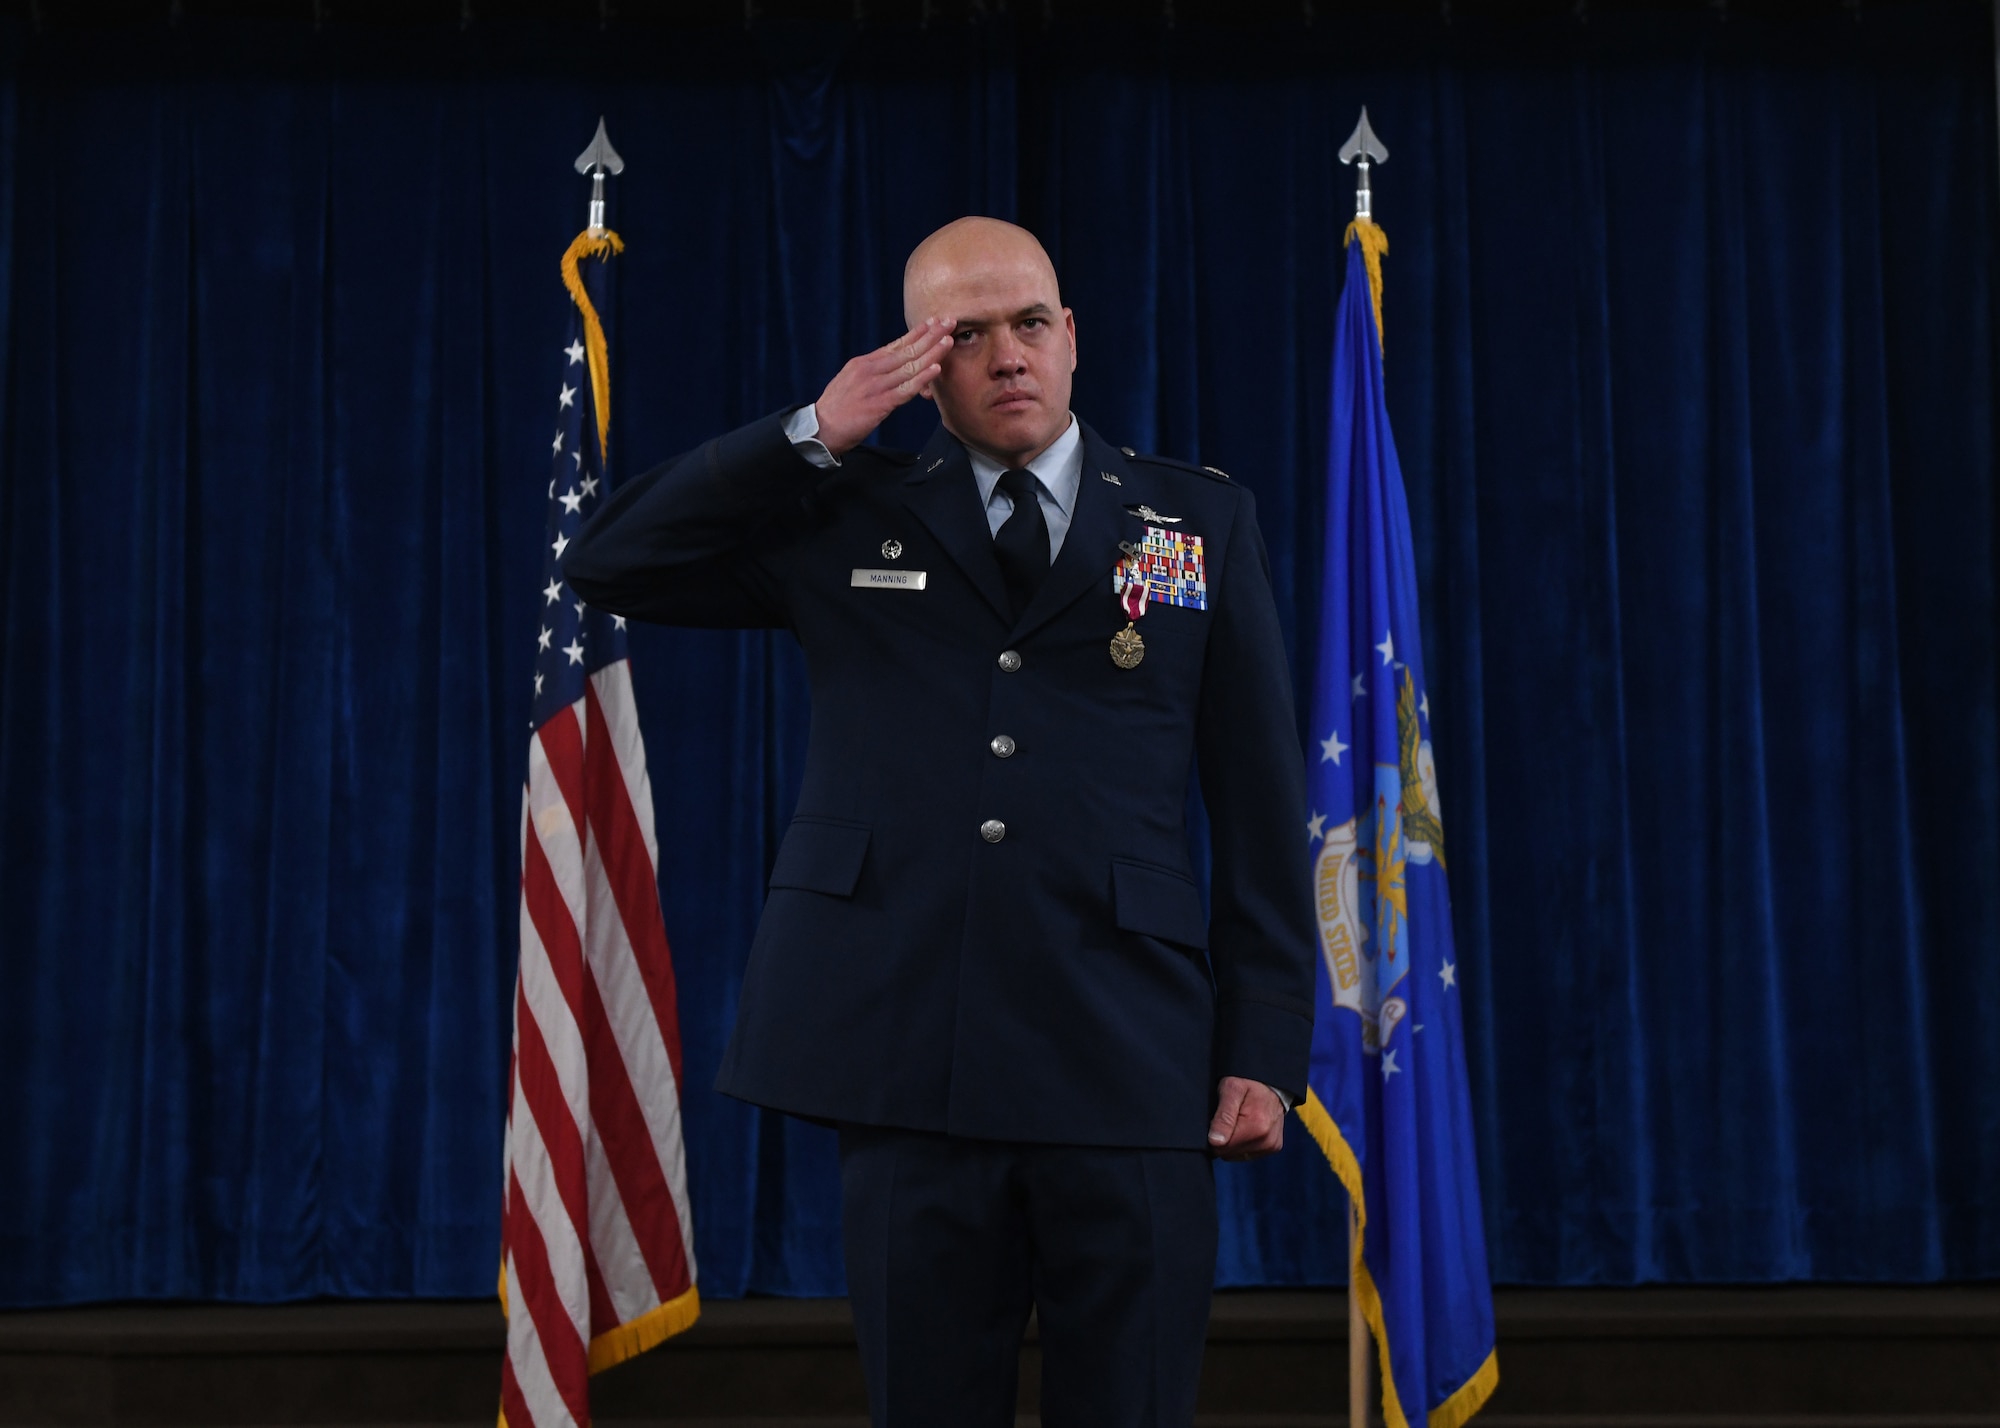 Lt. Col. Joseph Manning, the outgoing commander of the 90th Communication Squadron, renders his final salute to the members of 90 CS during a change of command ceremony on F.E. Warren Air Force Base, June 13, 2022. The change of command ceremony signifies the transition of command from Manning to Maj. Jeffrey Mickelsen, the incoming commander of 90 CS. (U.S. Air Force photo by Airman 1st Class Darius Frazier.)